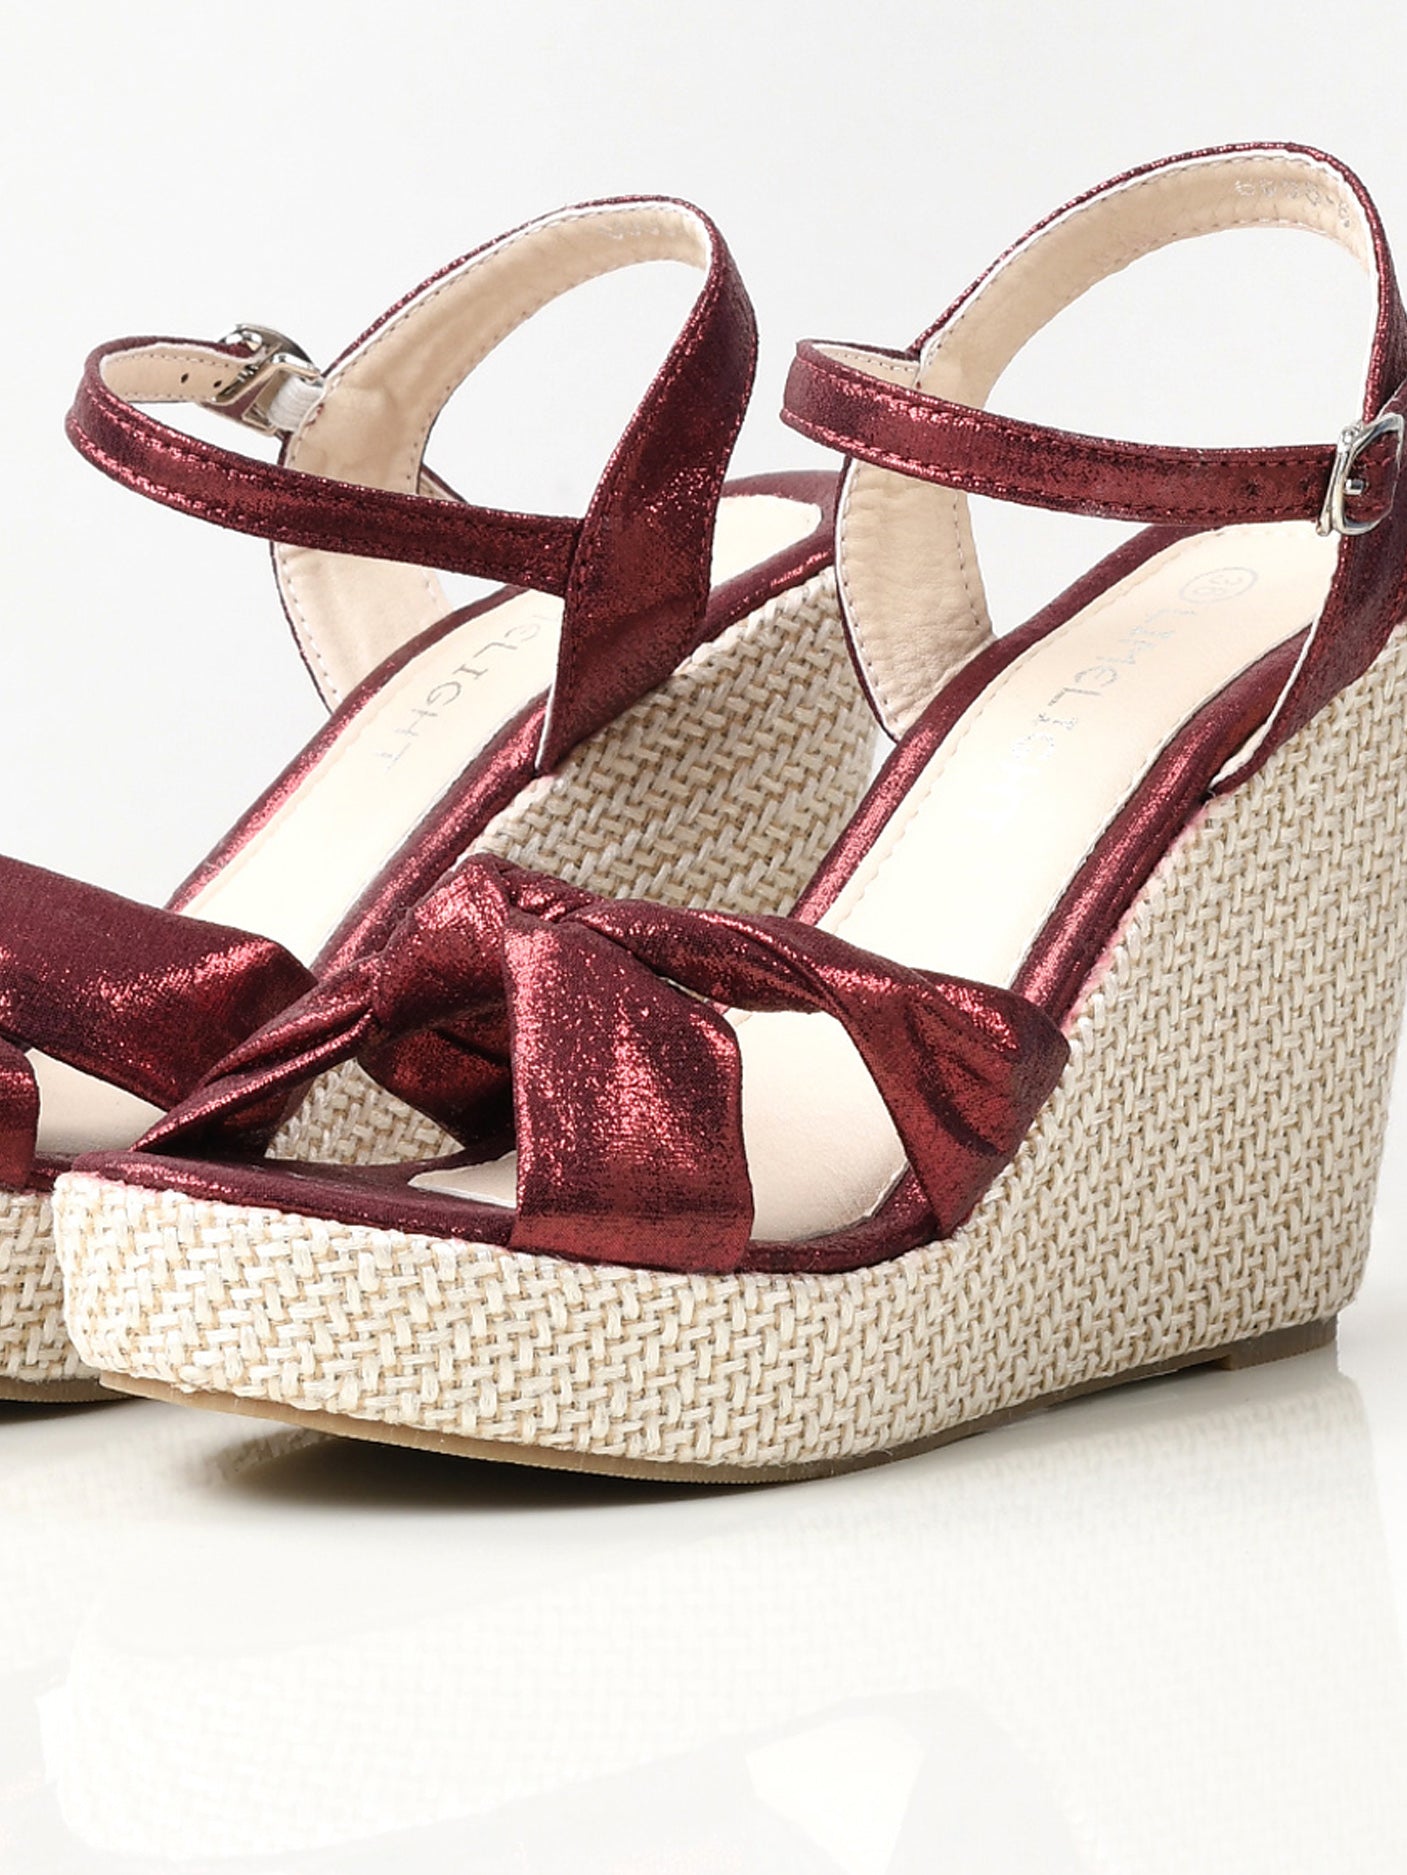 Shiny Knotted Wedges - Maroon